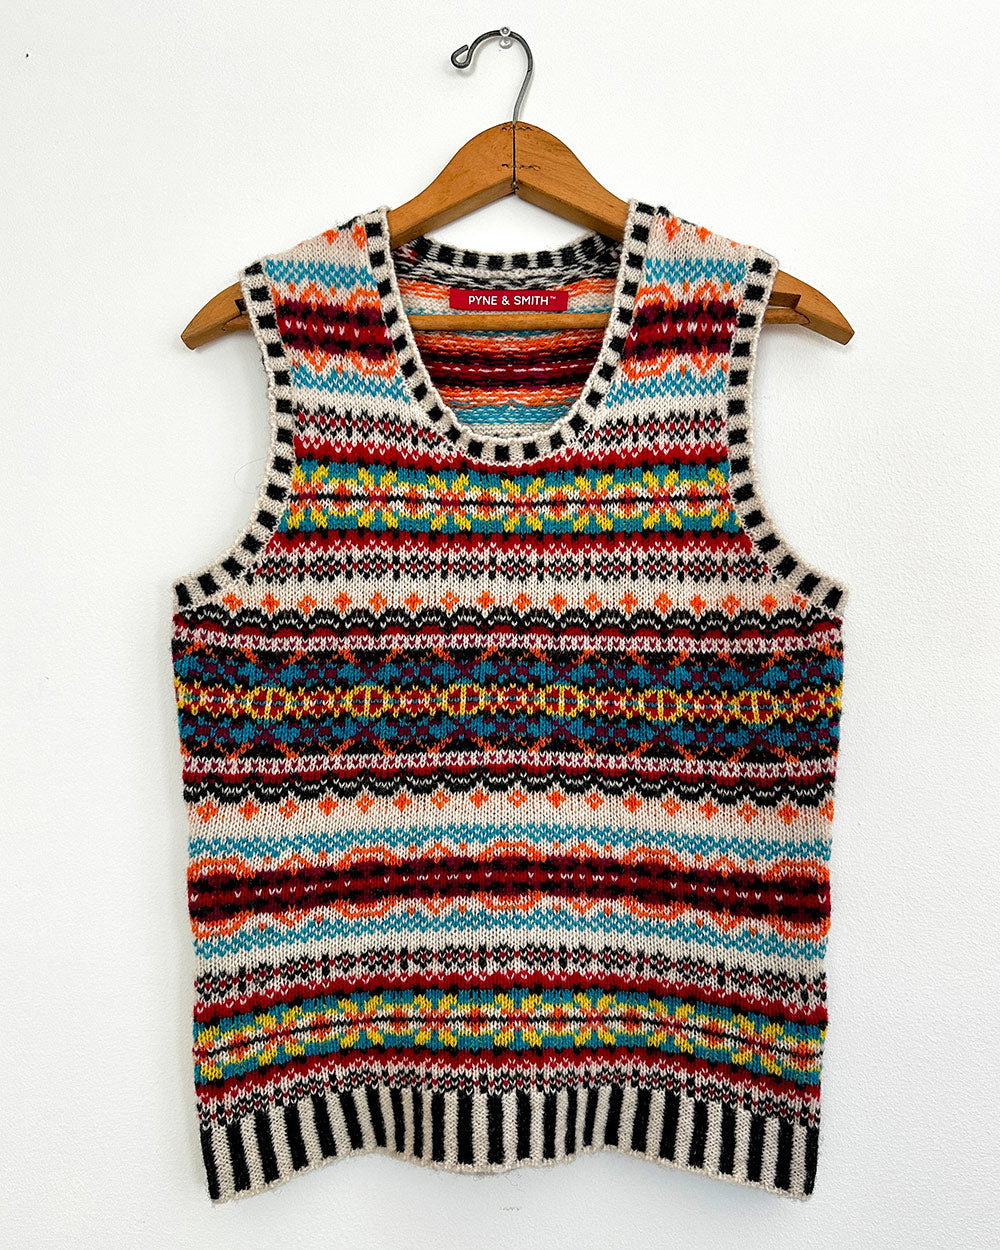 A colorful Fair Isle wool vest hangs on a white wall